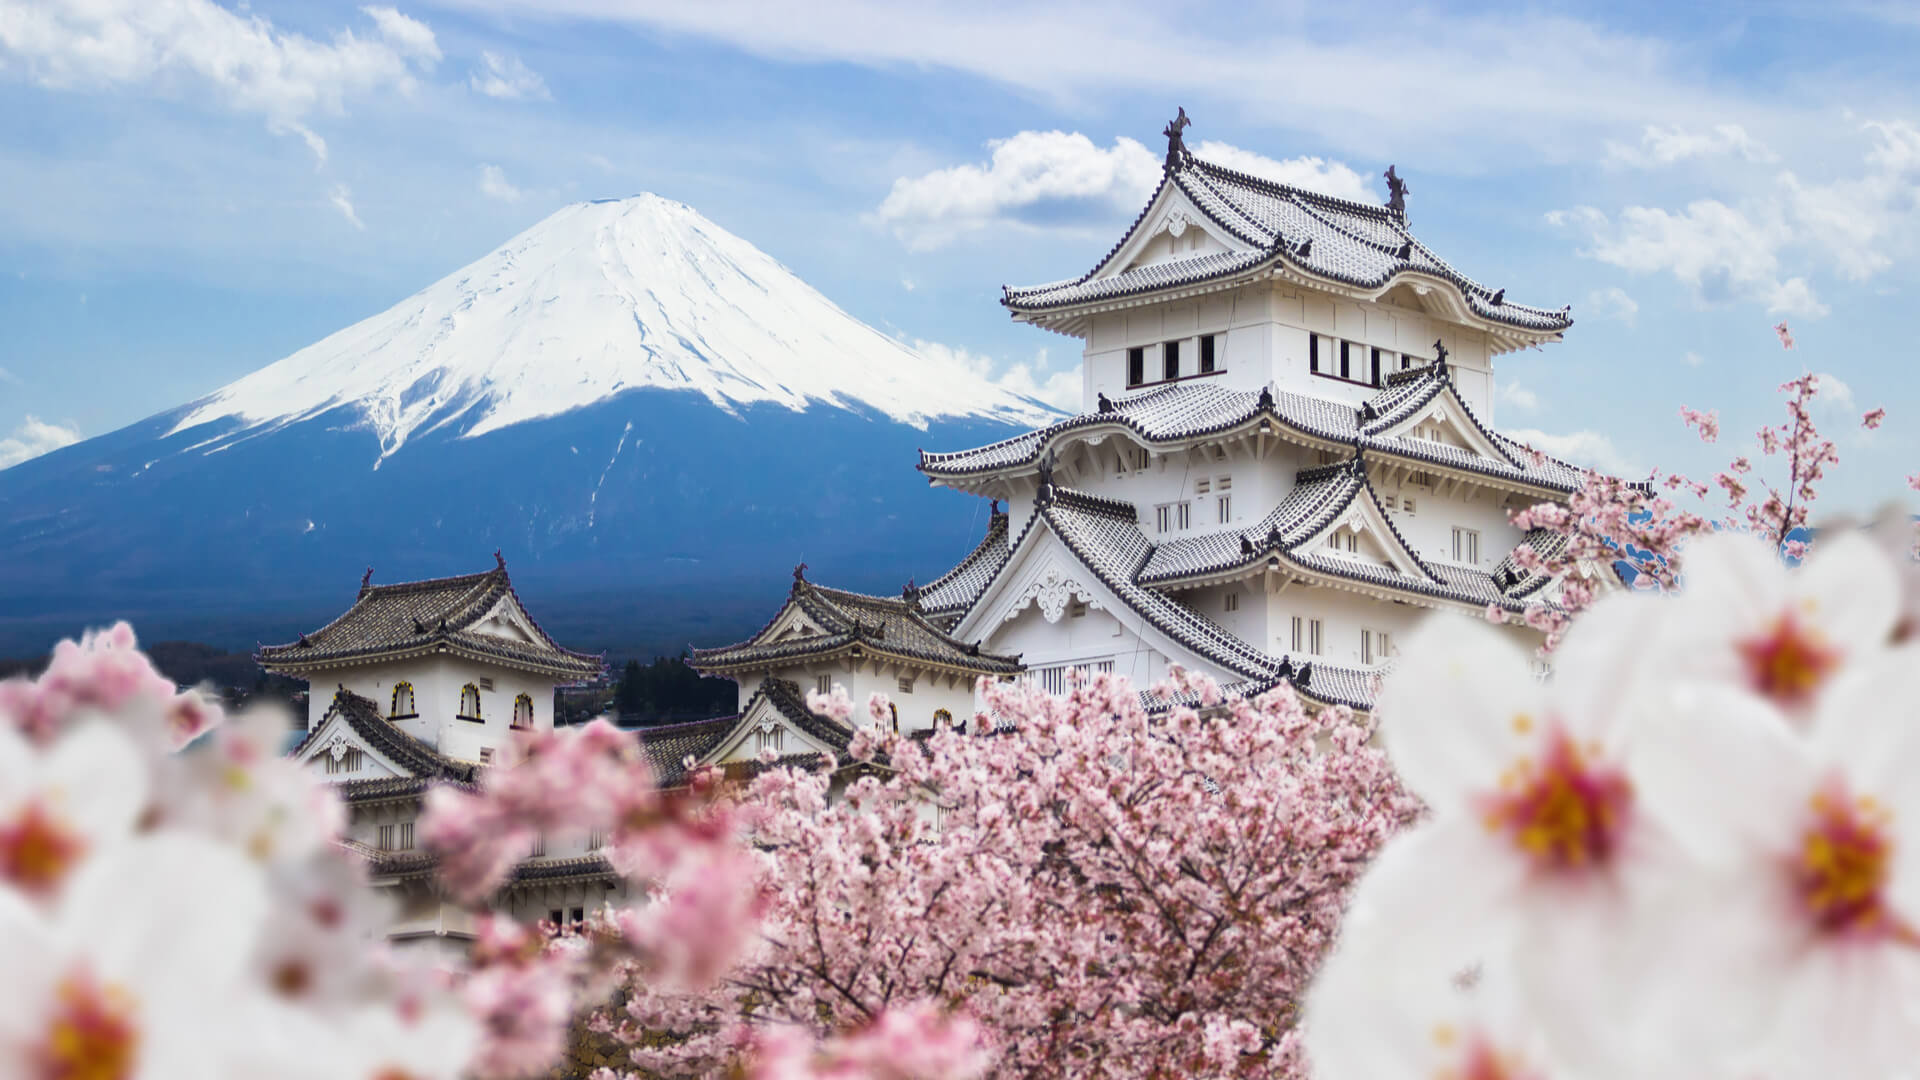 Himeji Castle and full cherry blossom with Fuji mountain background